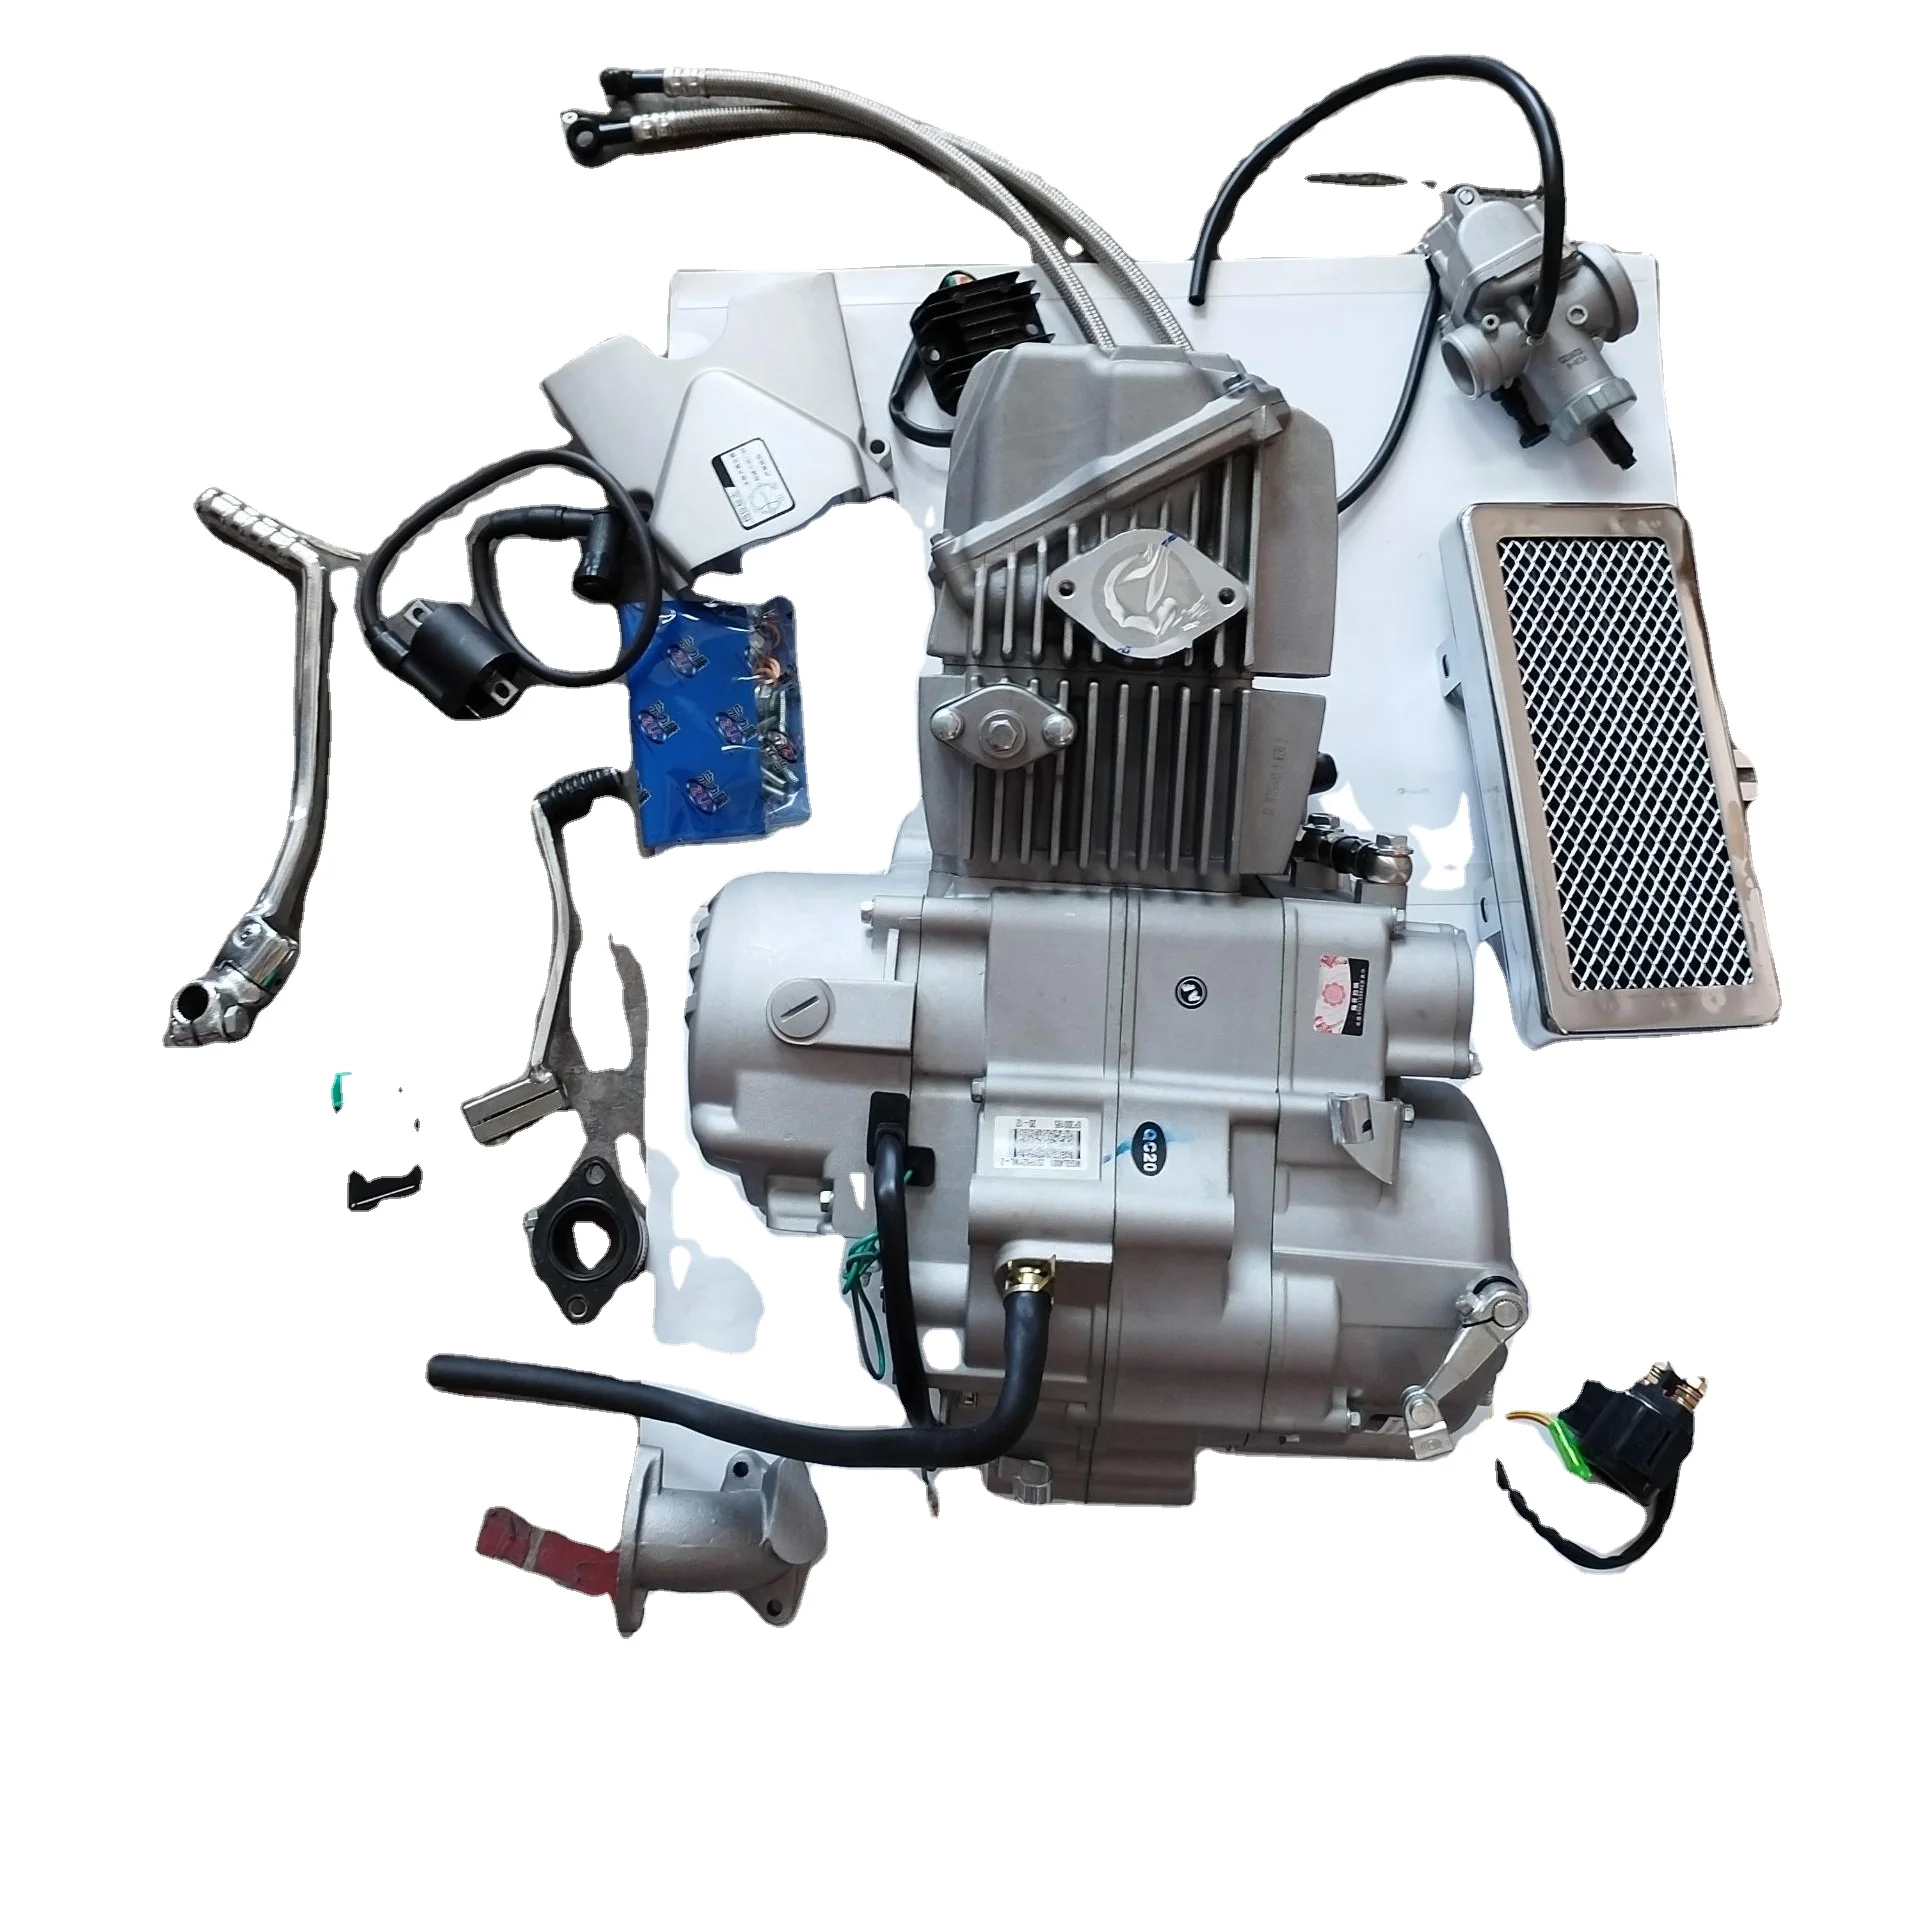 

zs190 motorcycle engine assembly Complete Motorcycle Engine 2 valve 4 stroke zongshen 190cc ZS1P62YML-2